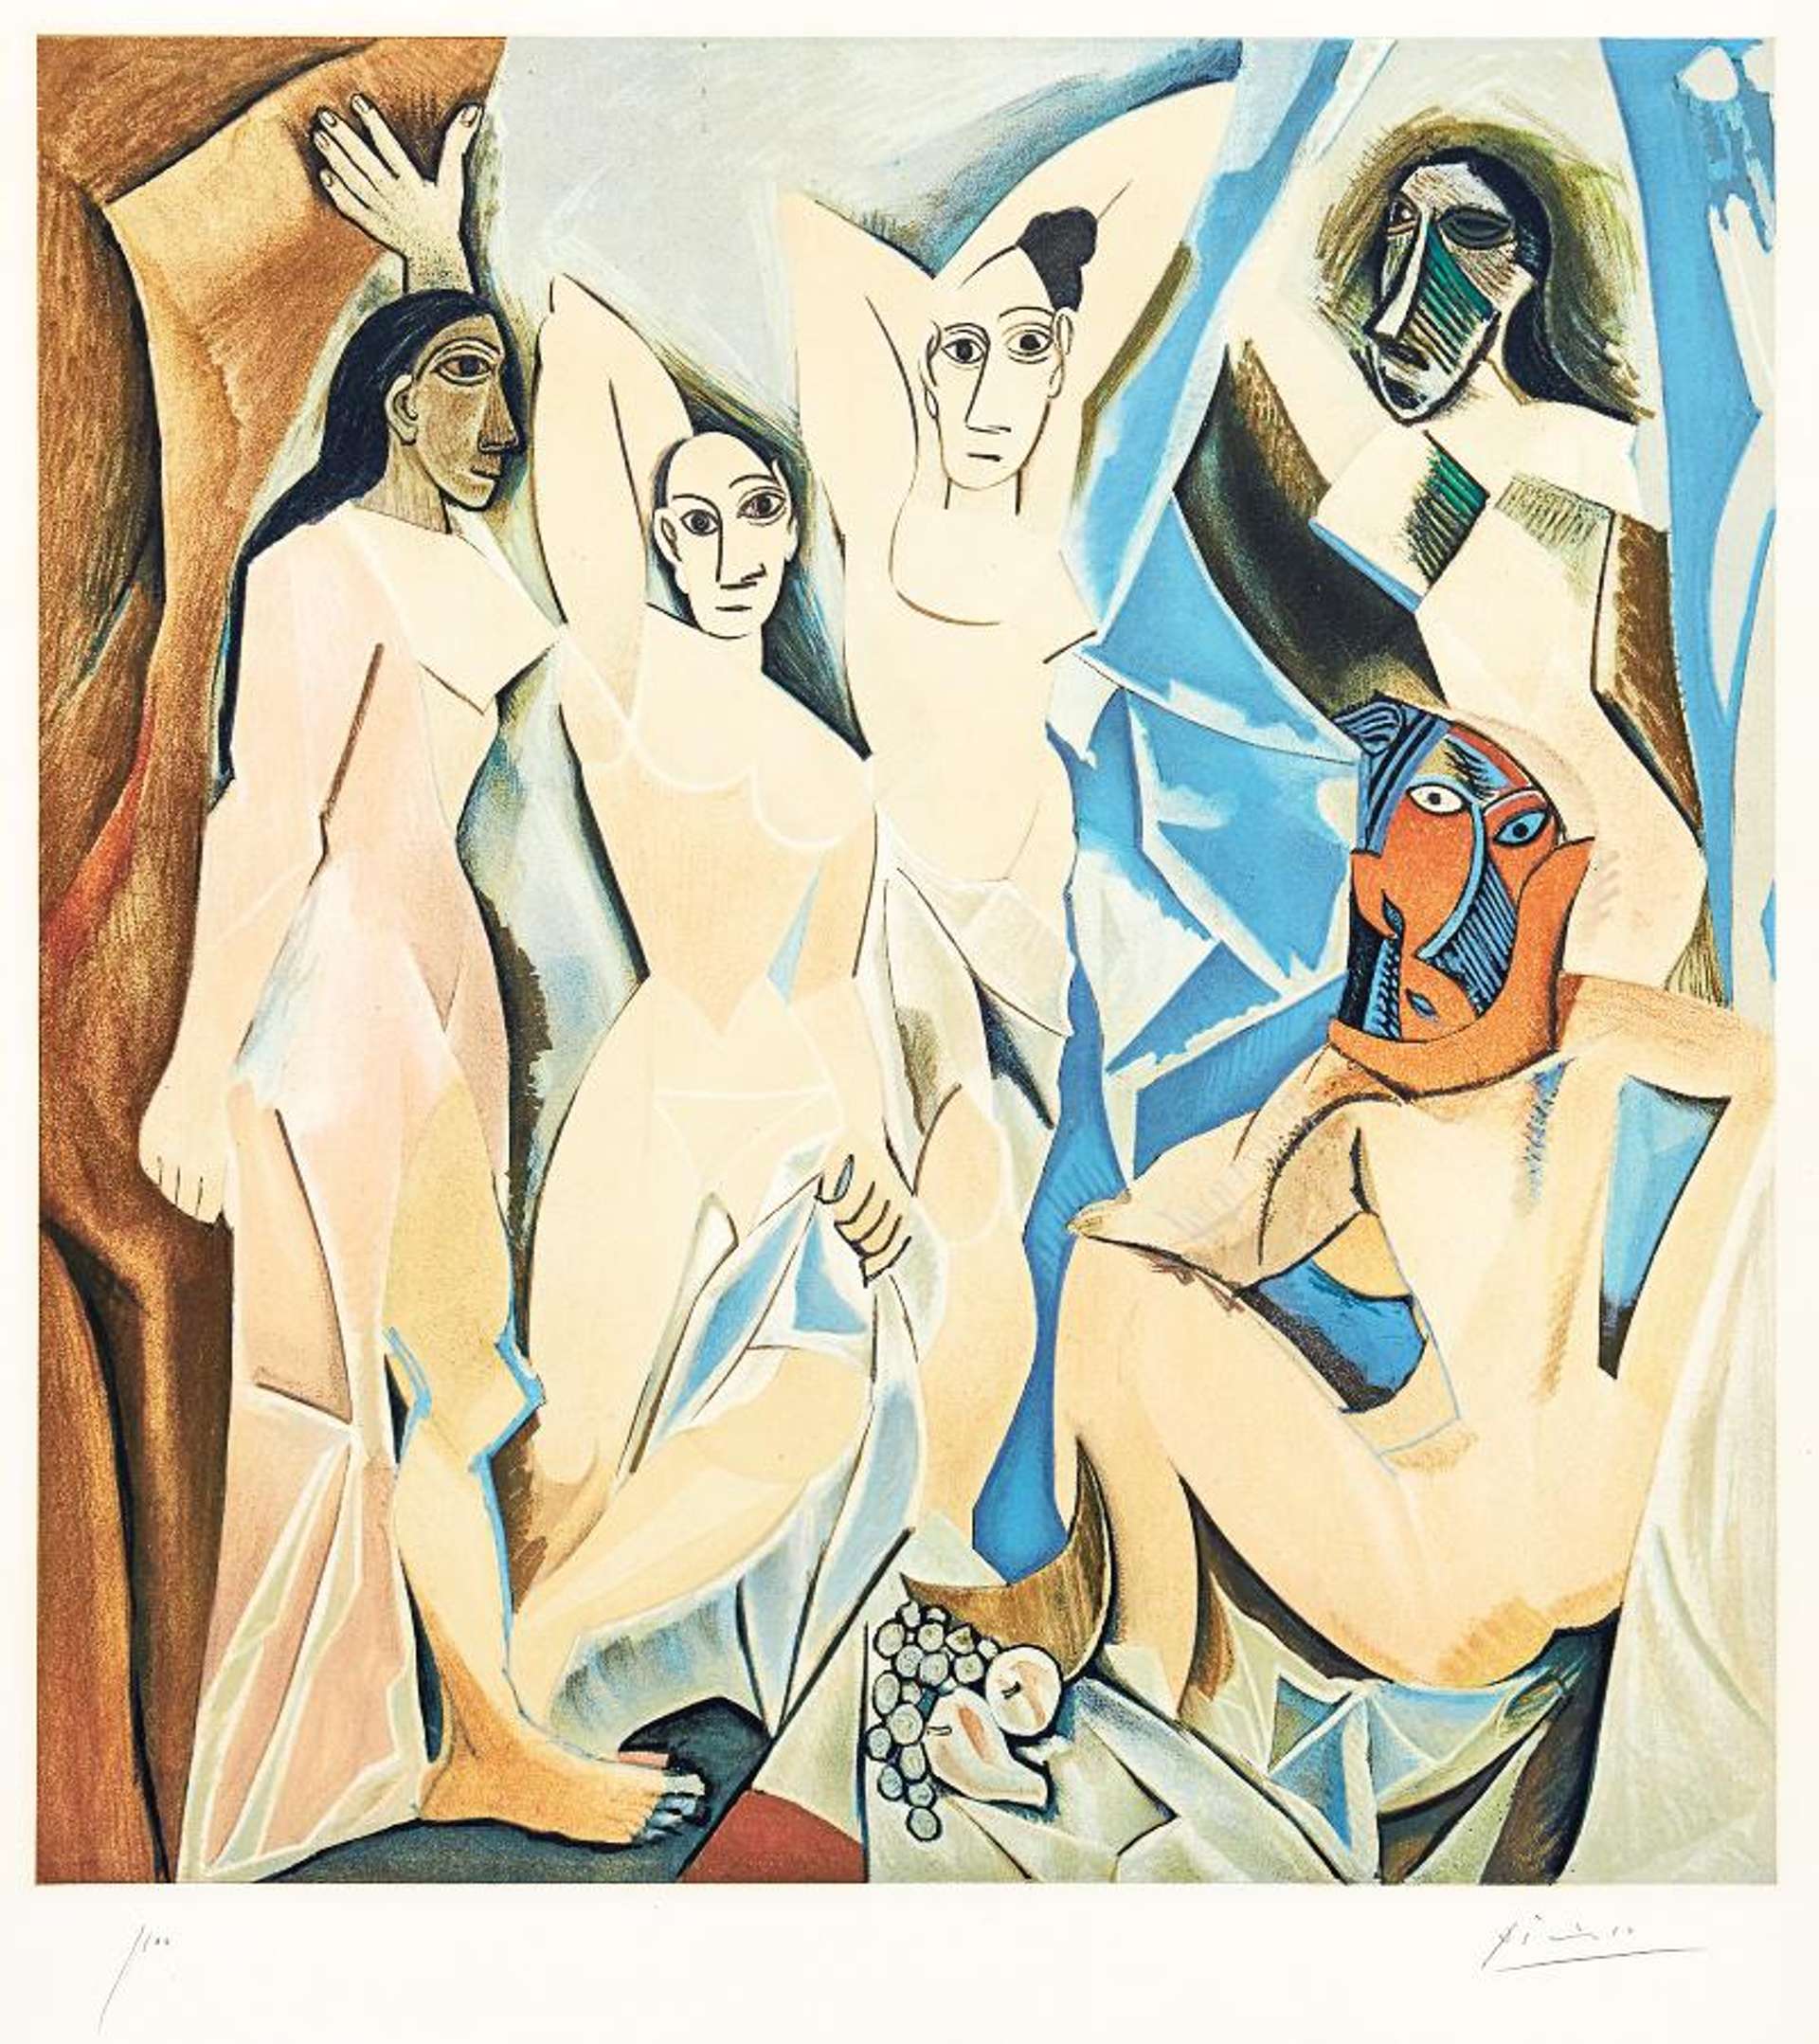 An image of the work Les Demoiselles Avignon by Pablo Picasso. It shows a group of nude female figures, depicted in Picasso's cubist geometric style. The colour palette is mostly composed of pinks and blues.